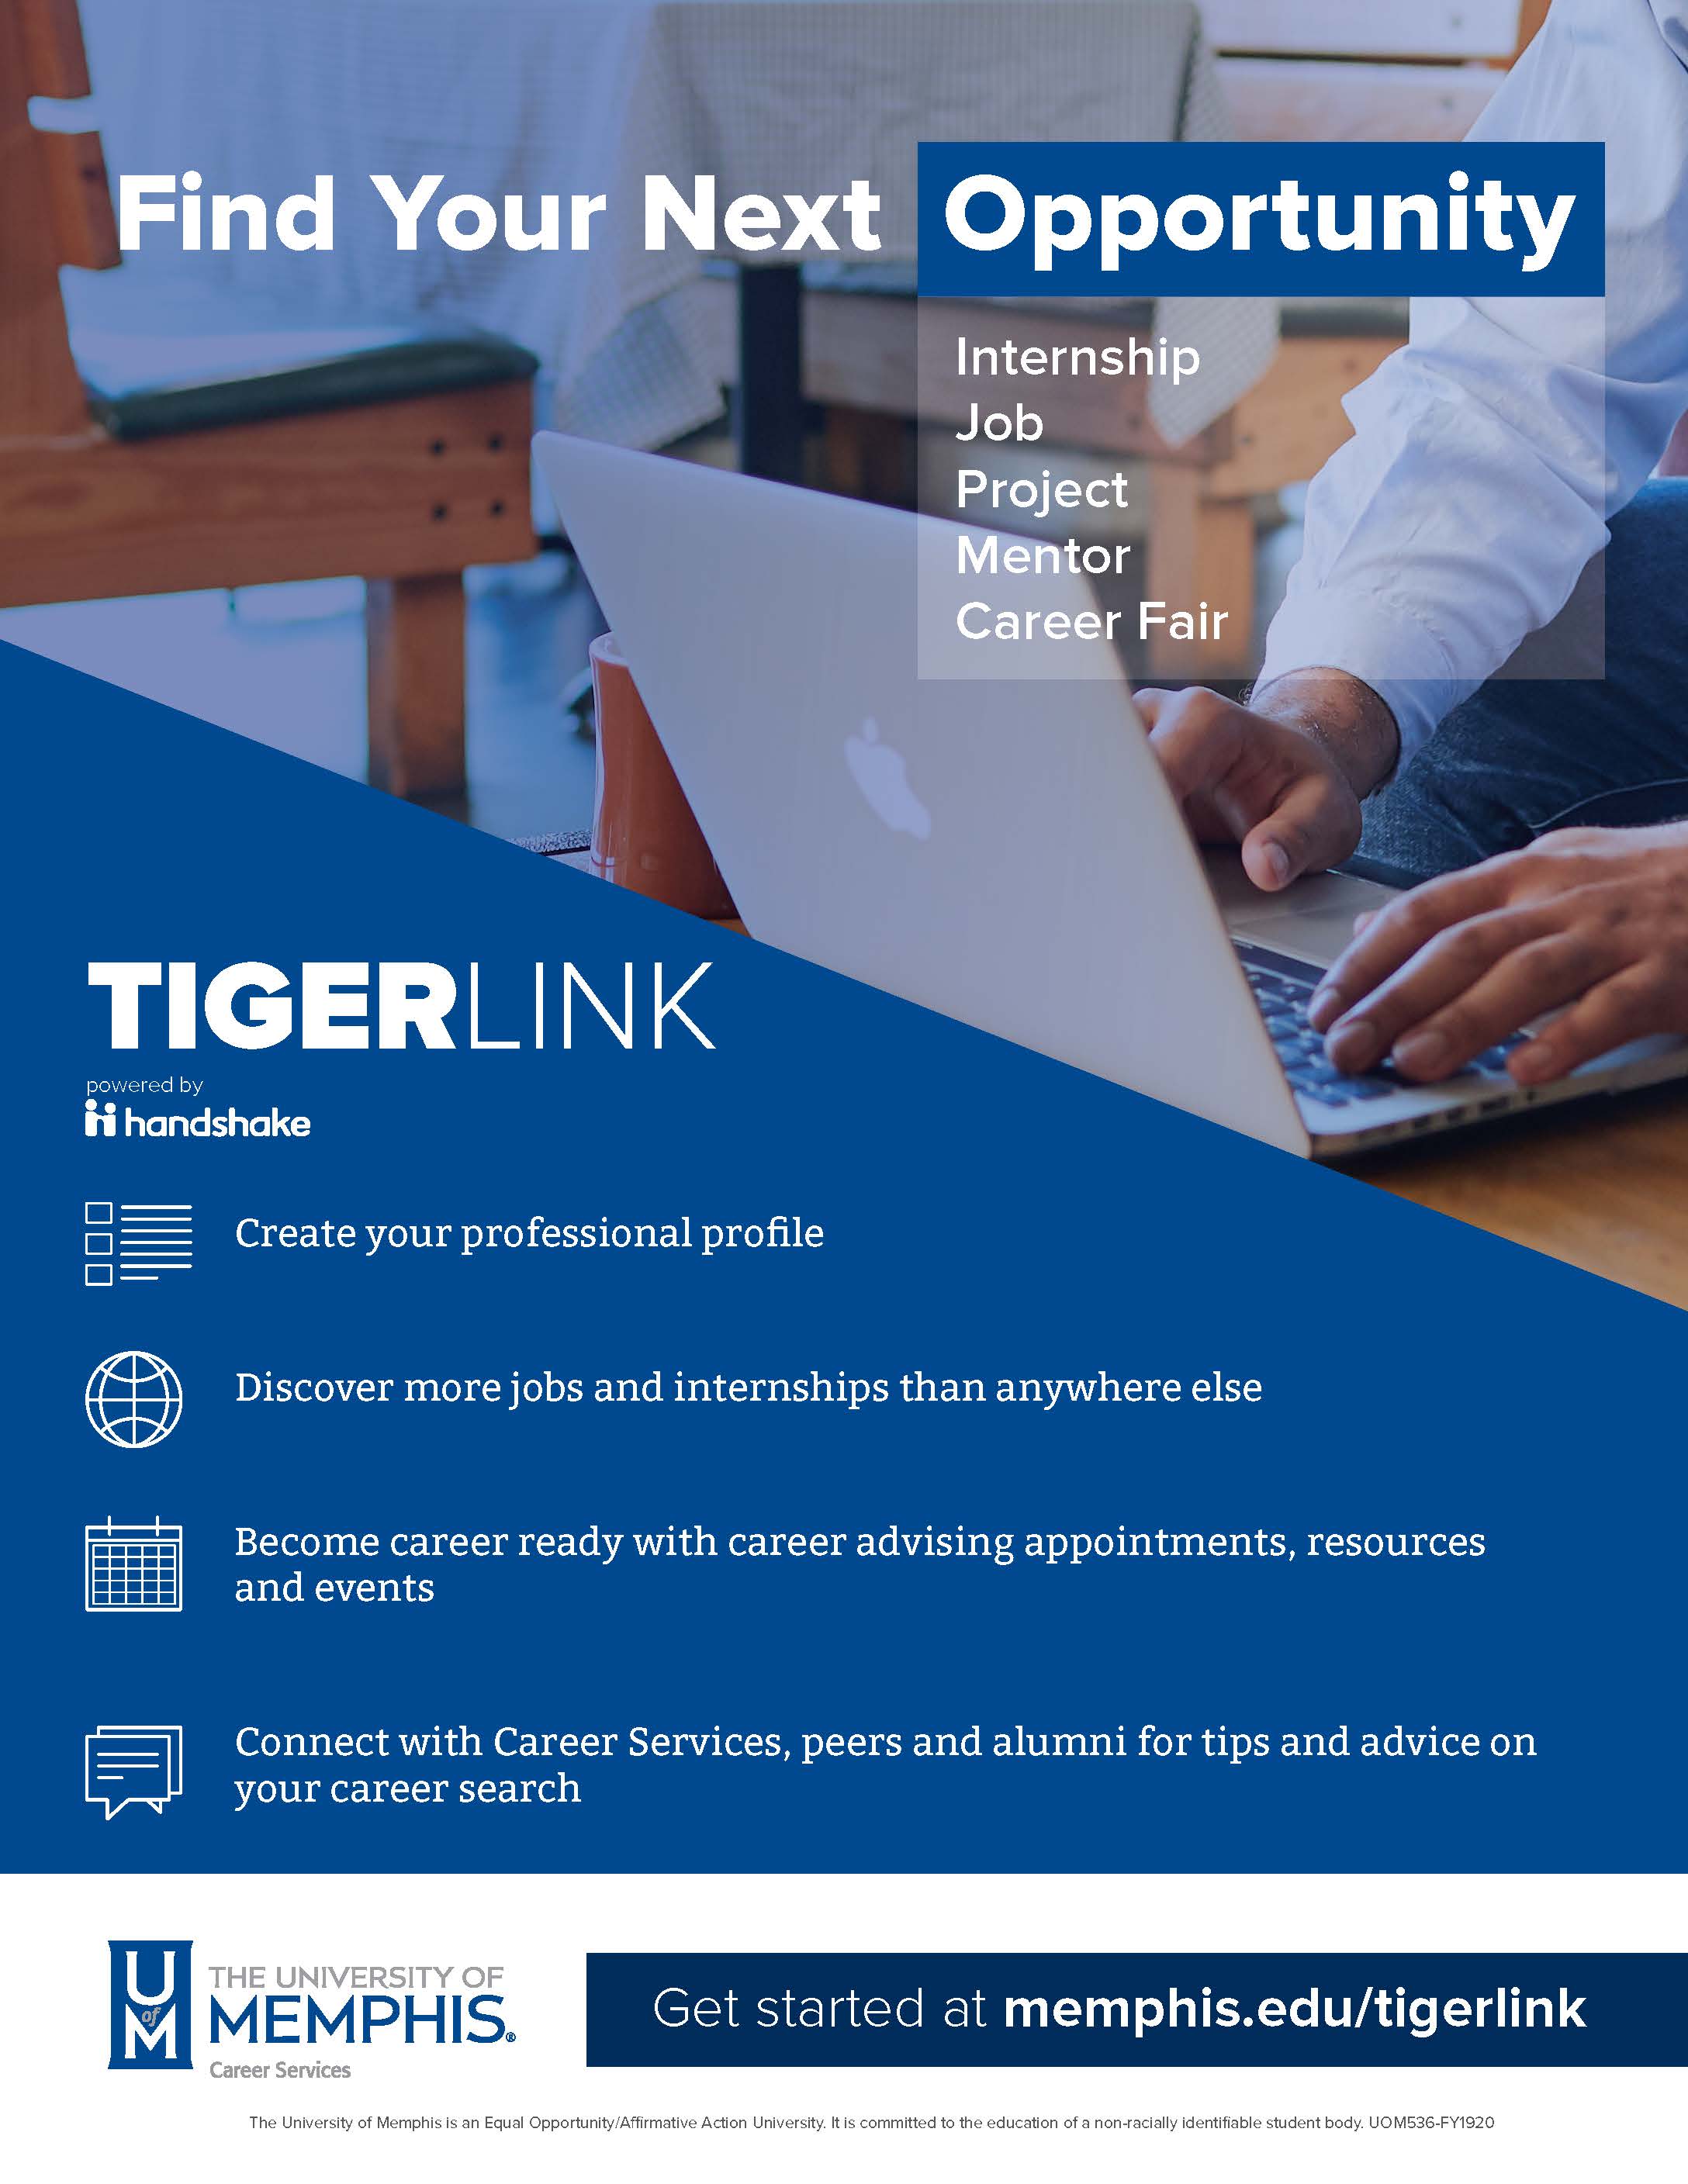 Find Your Next Opportunity: TigerLink powered by handshake. Create your professional photo, Discover more jobs and internships than anywhere else. Become career ready with career advising appointments, resources and events. Connect with Career Services, peers and alumni for tips and advice on your career search. Get started at memphis.edu/tigerlink